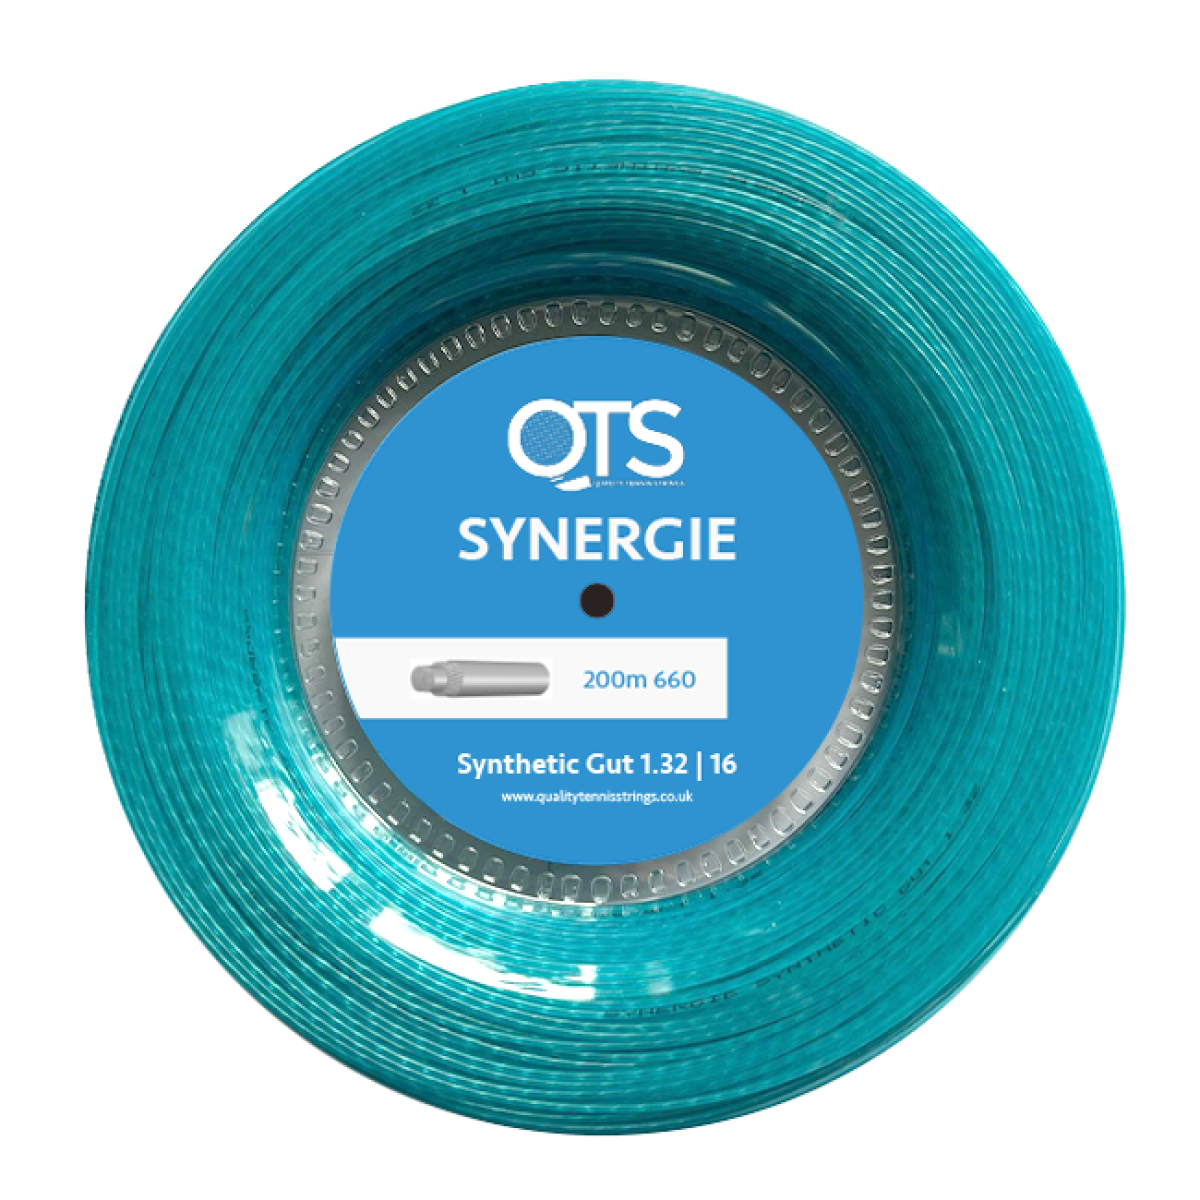 Synergie High-Tech Synthetic Gut Pro Tennis String (1.32 200m